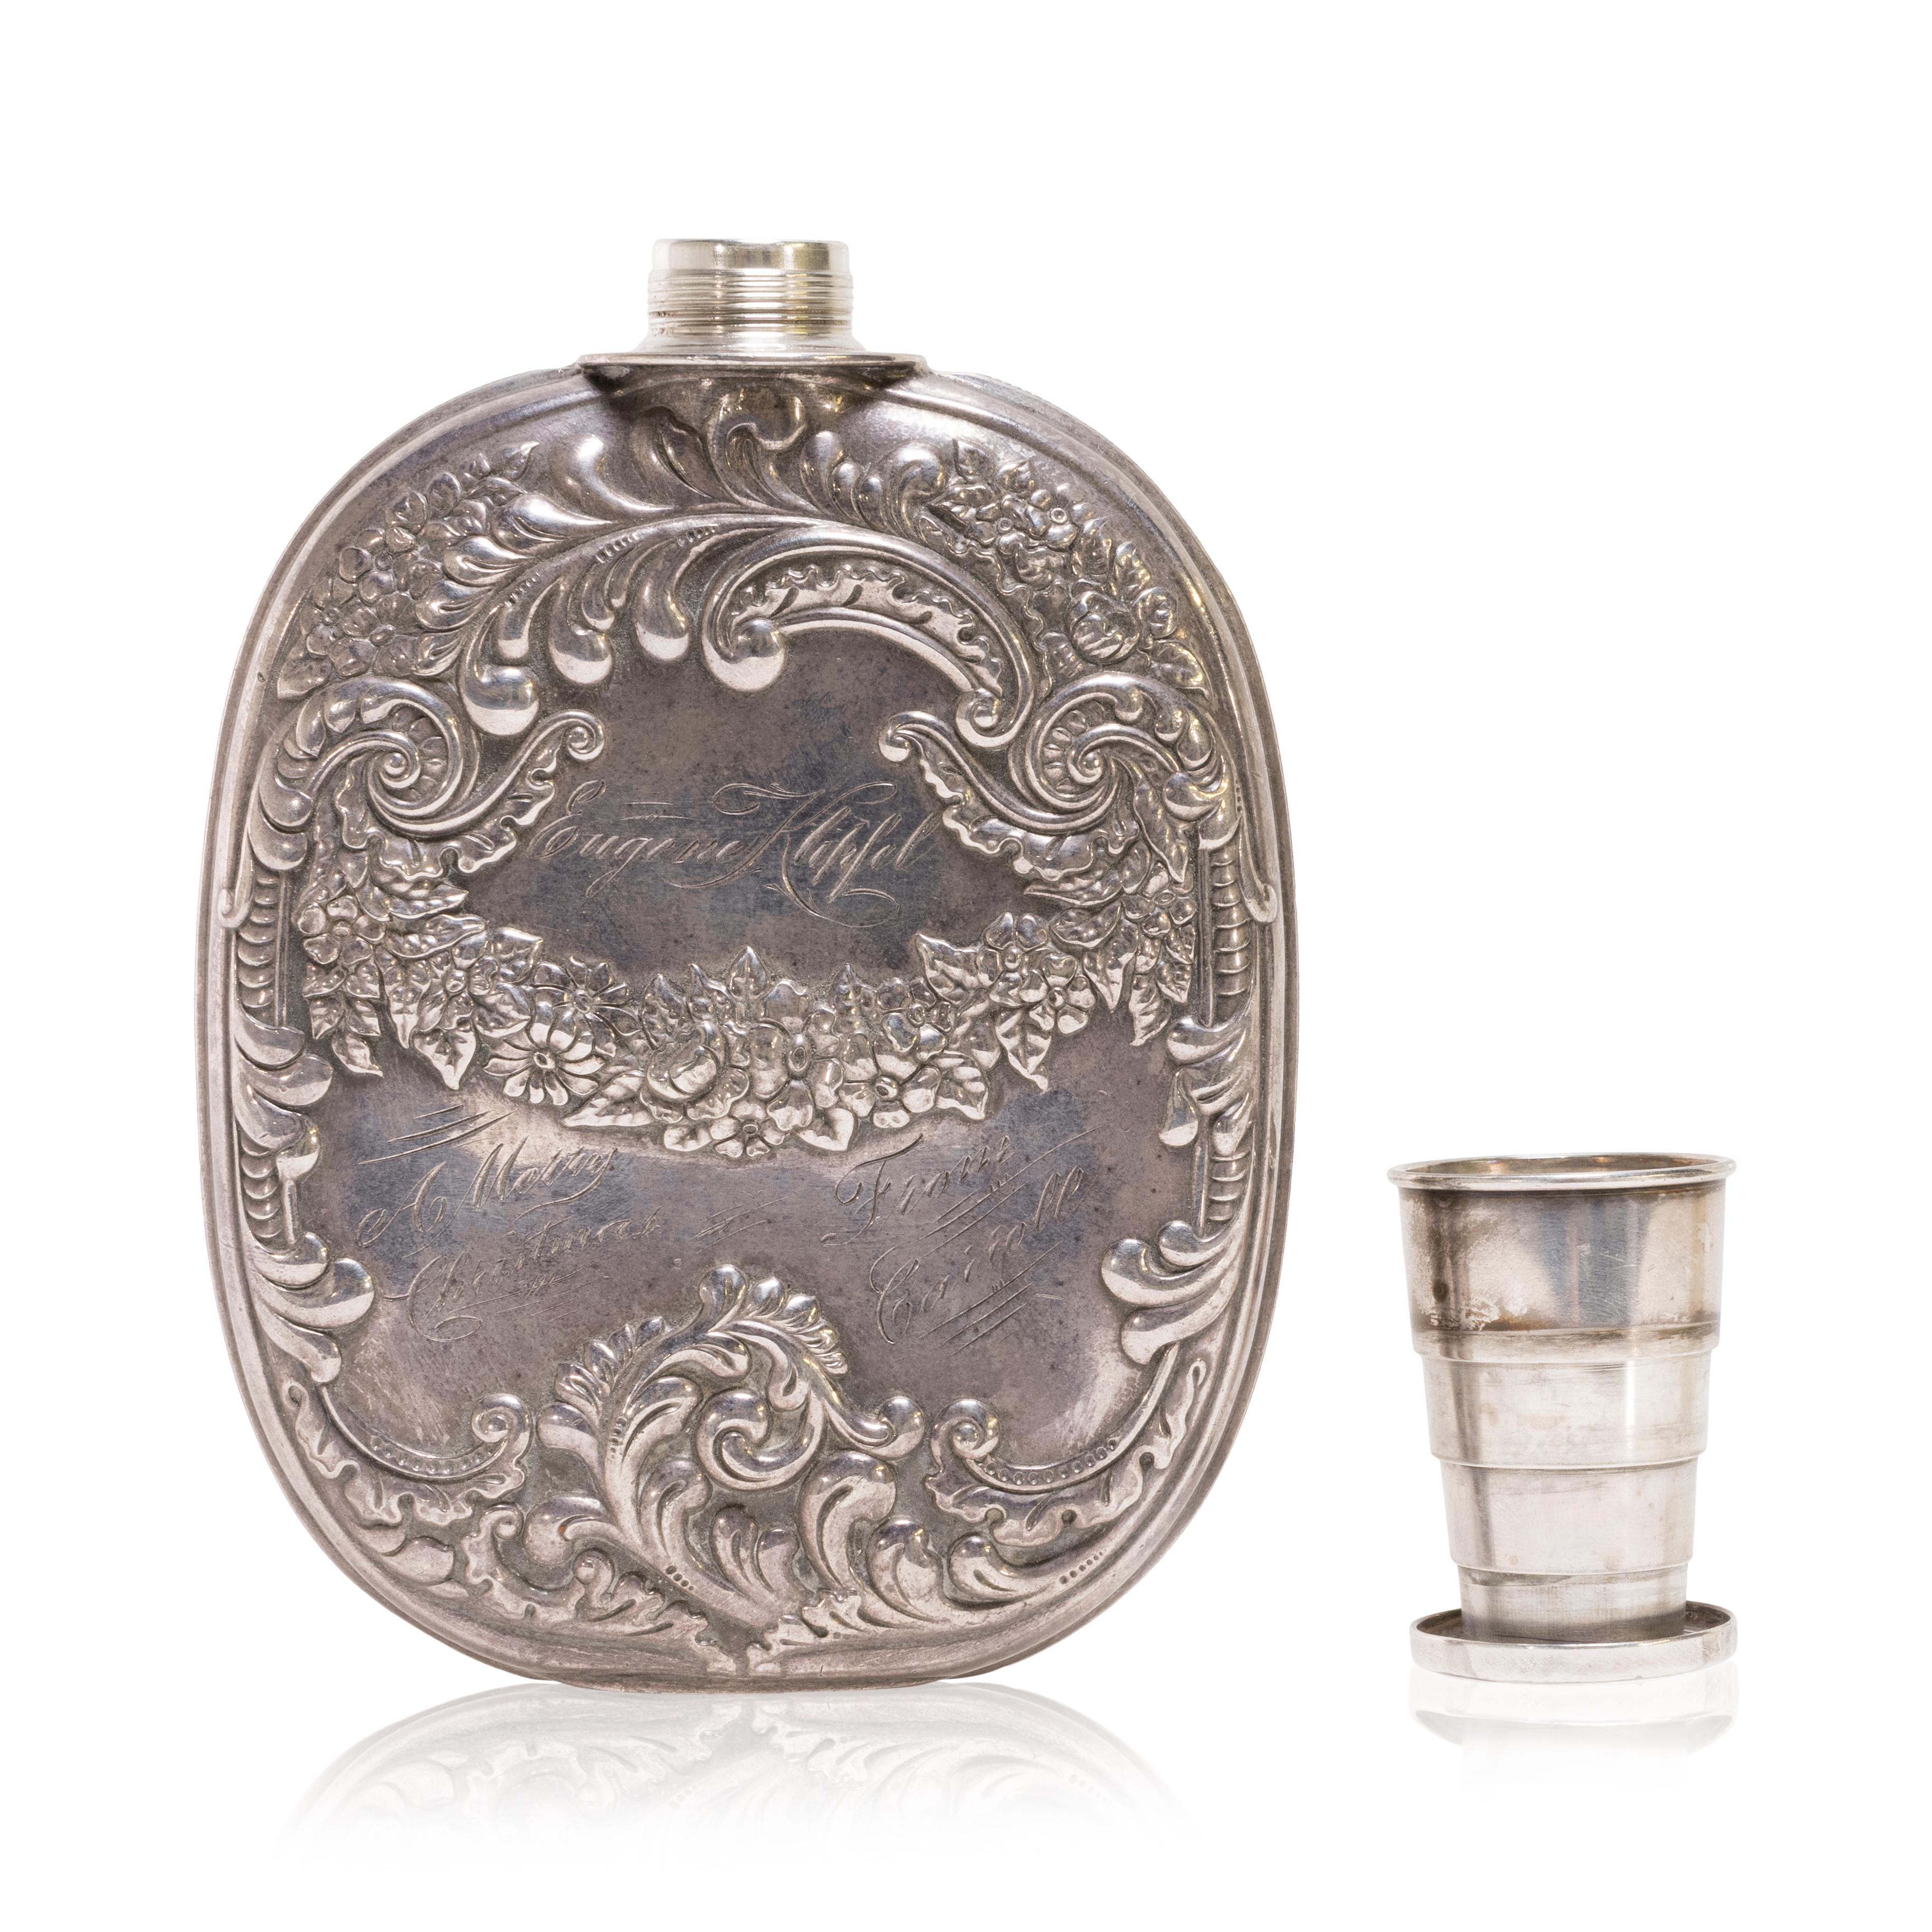 Vintage sterling silver flask with extendable shot glass lid. This wonderful flask features outstanding silver work of leaves and flowers. It has a great weight and includes an extendable shot glass. The item was once a gift to 